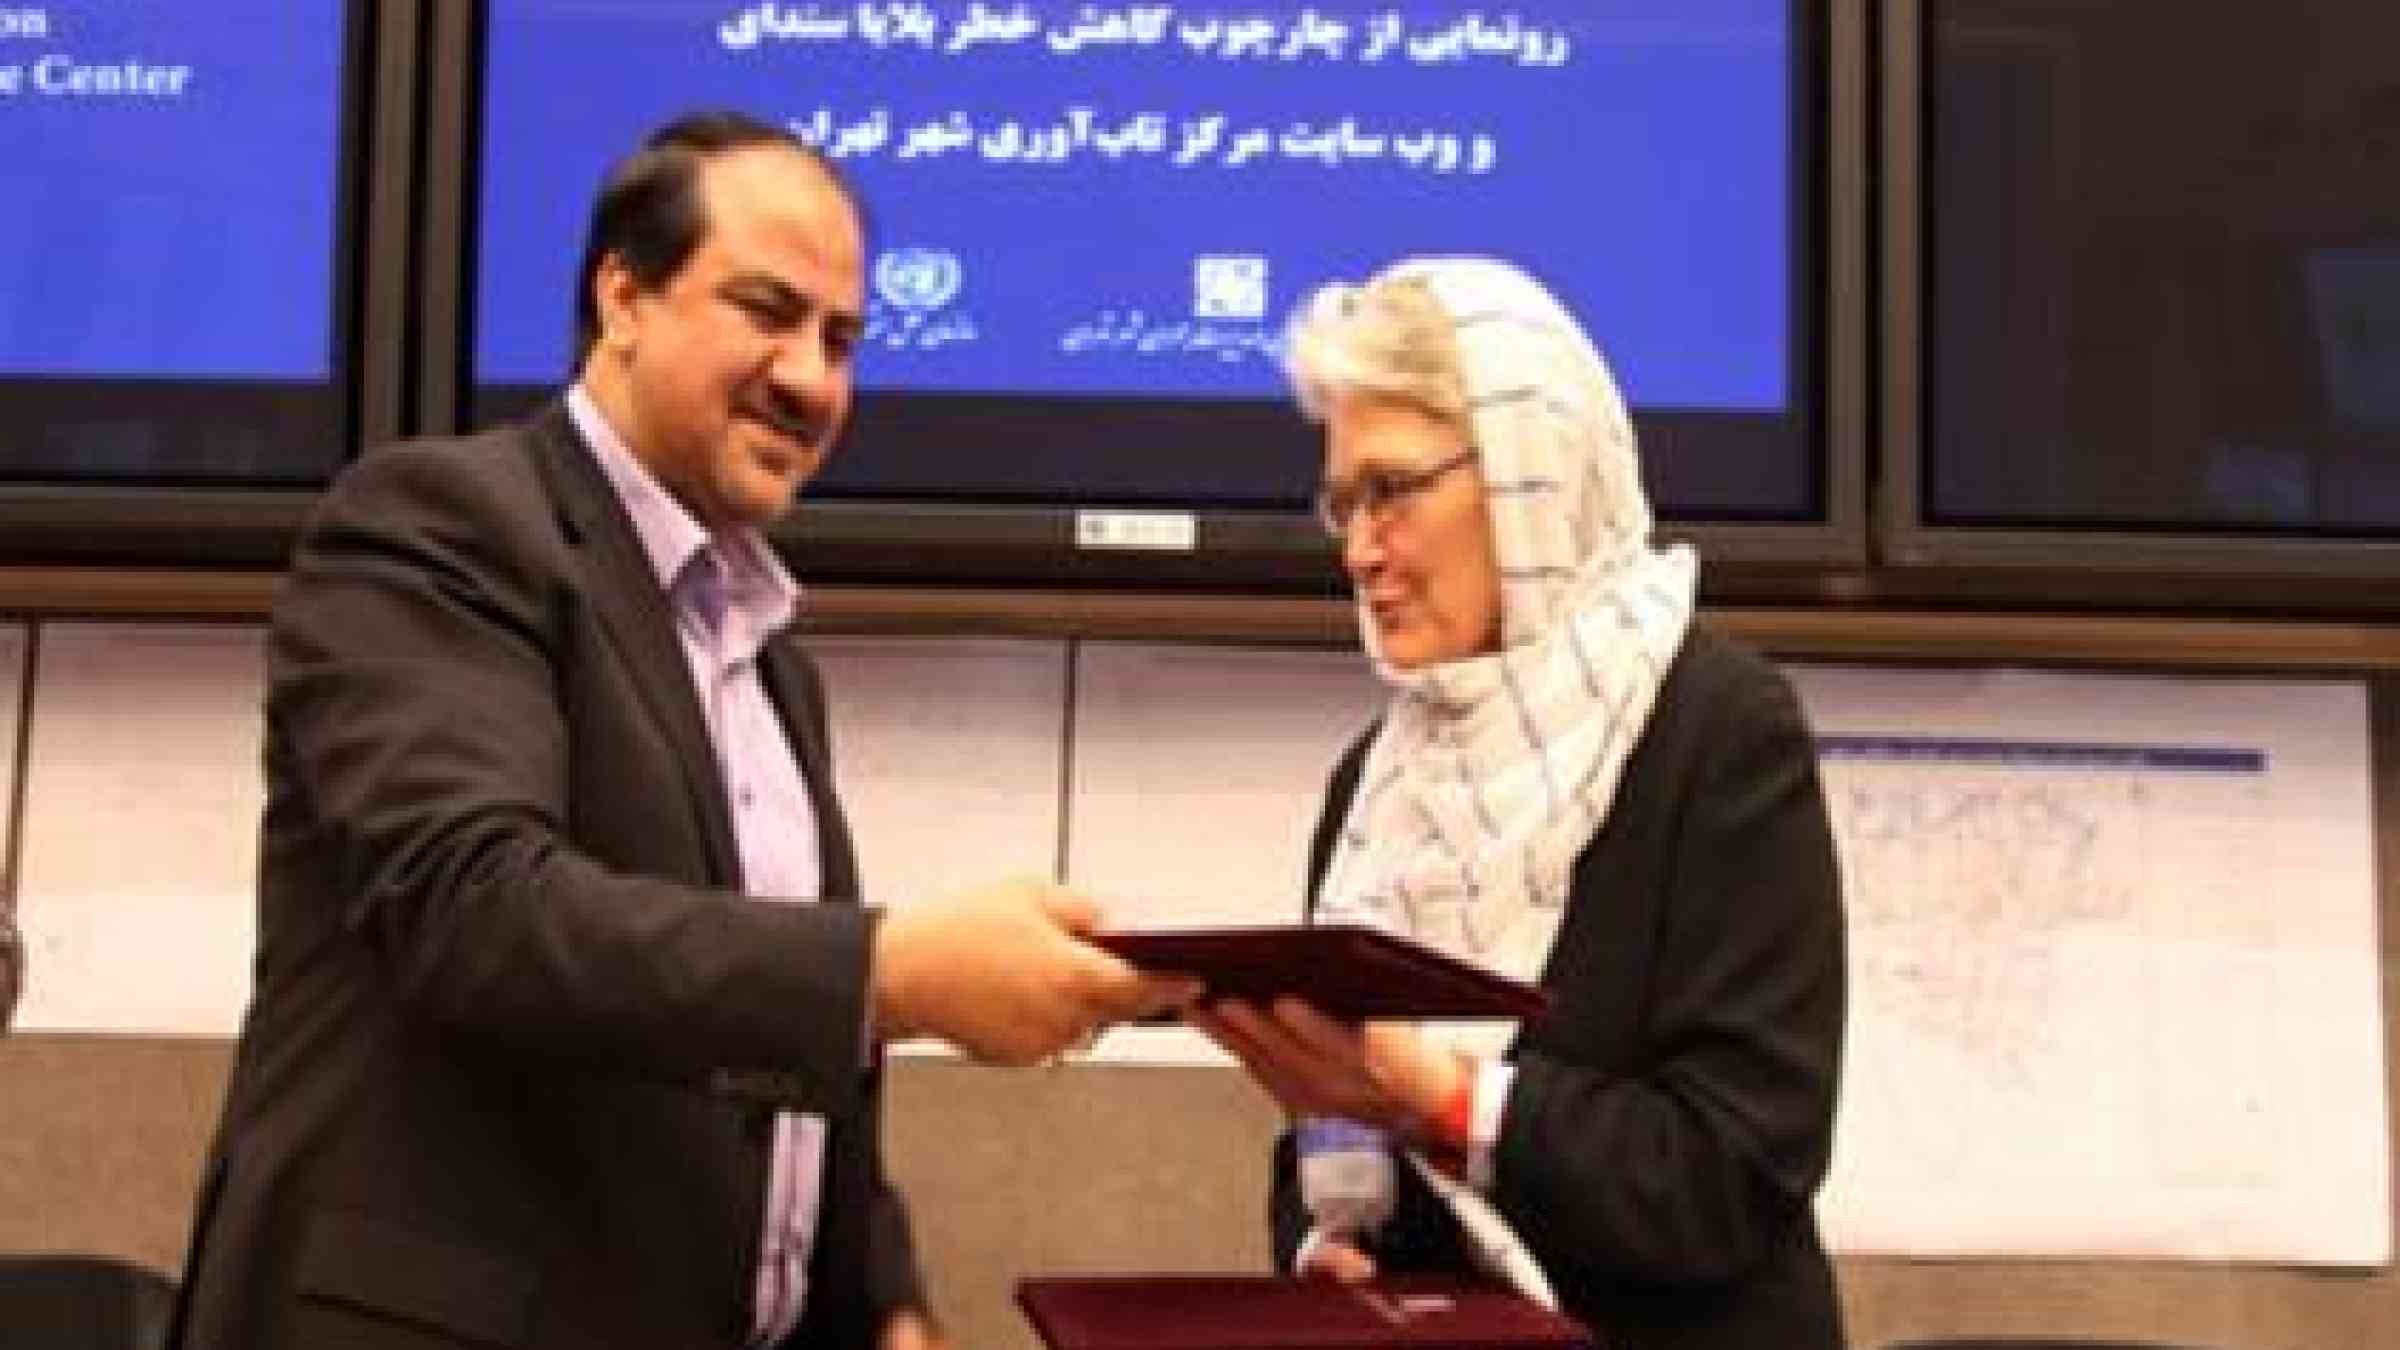 Dr. Ahmad Sadeghi, the head of the Tehran Disaster Mitigation and Management Organization  presenting the head of UNISDR, Ms. Margareta Wahlstrom, with a copy of the Sendai Framework translated into Farsi. (Photo: UNISDR)